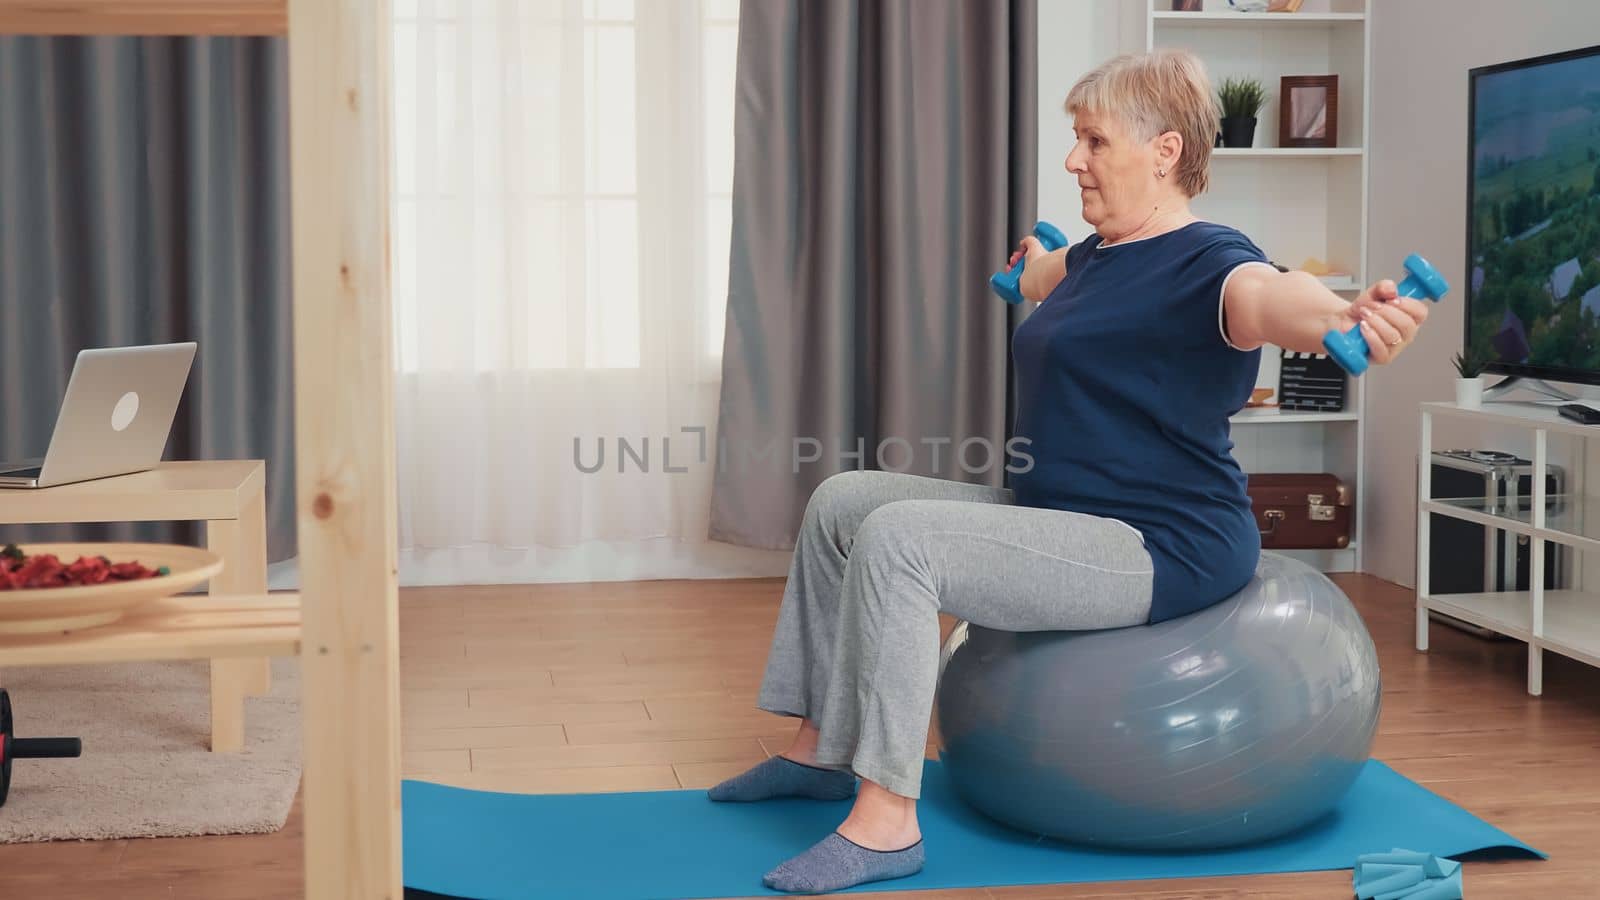 Grandmother lifting weights sitting on balance ball in living room. Old person training at home sport healthy lifestyle, elderly fitness exercise workout in apartment, activity and healthcare